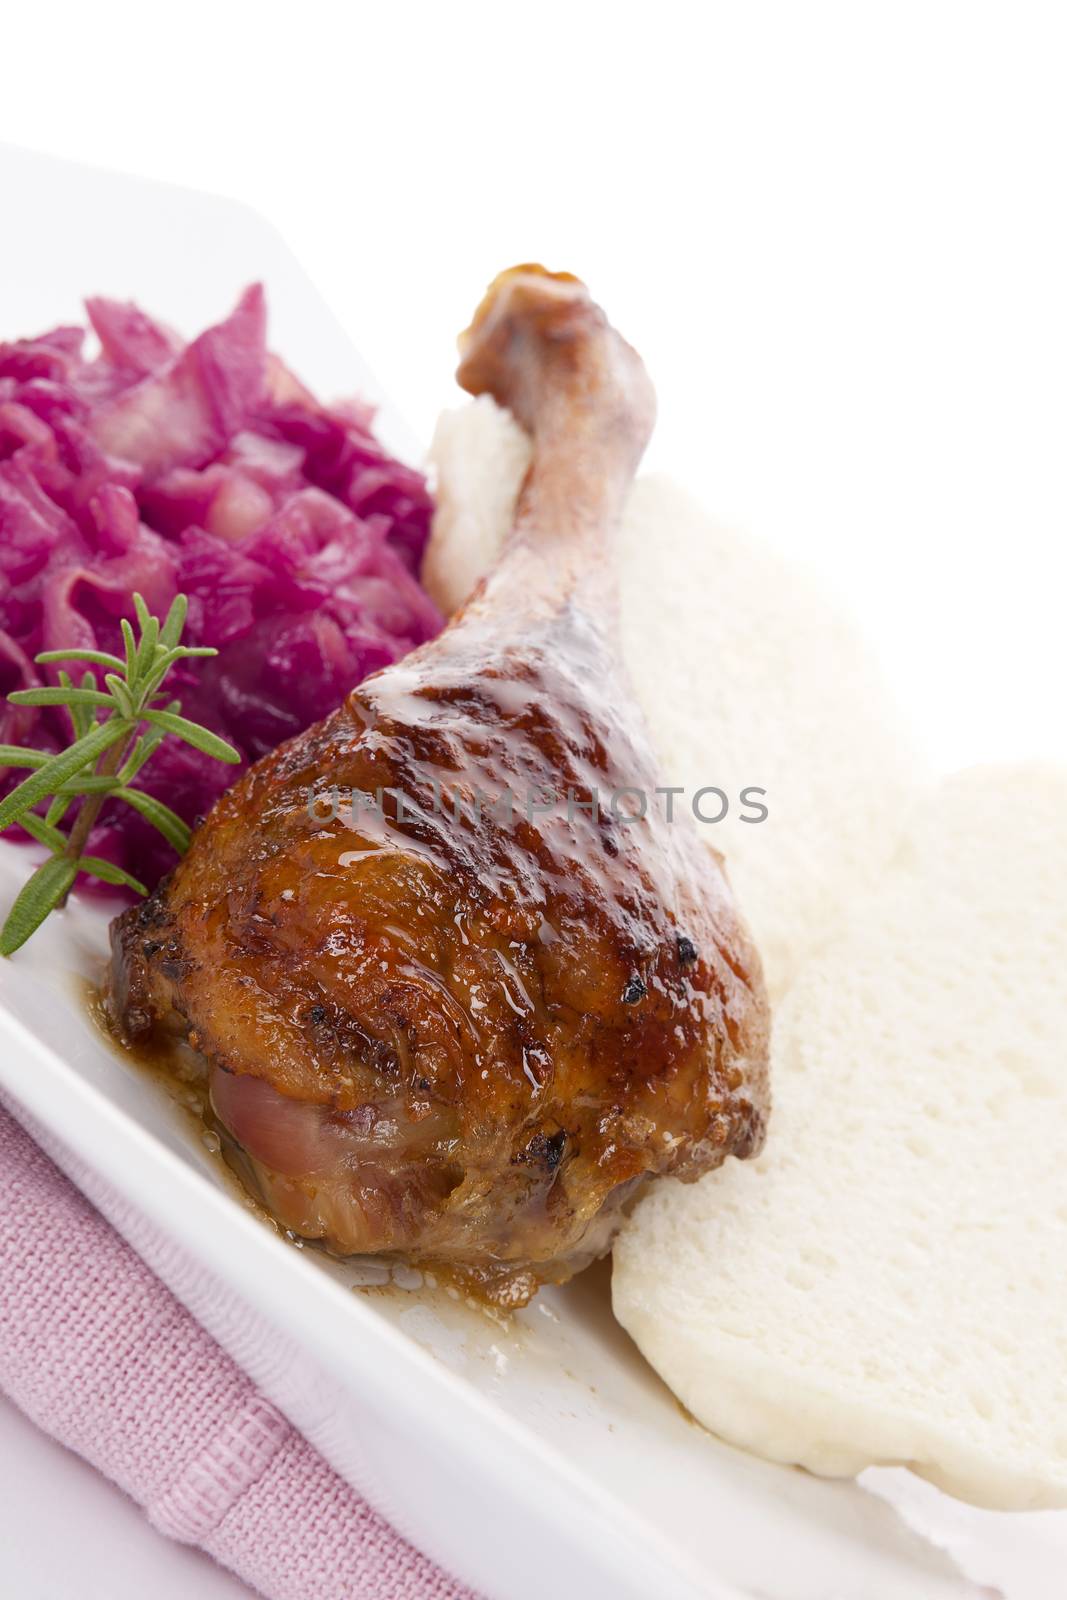 Delicious roast duck with red cabbage and dumplings. Traditional festive eating. 